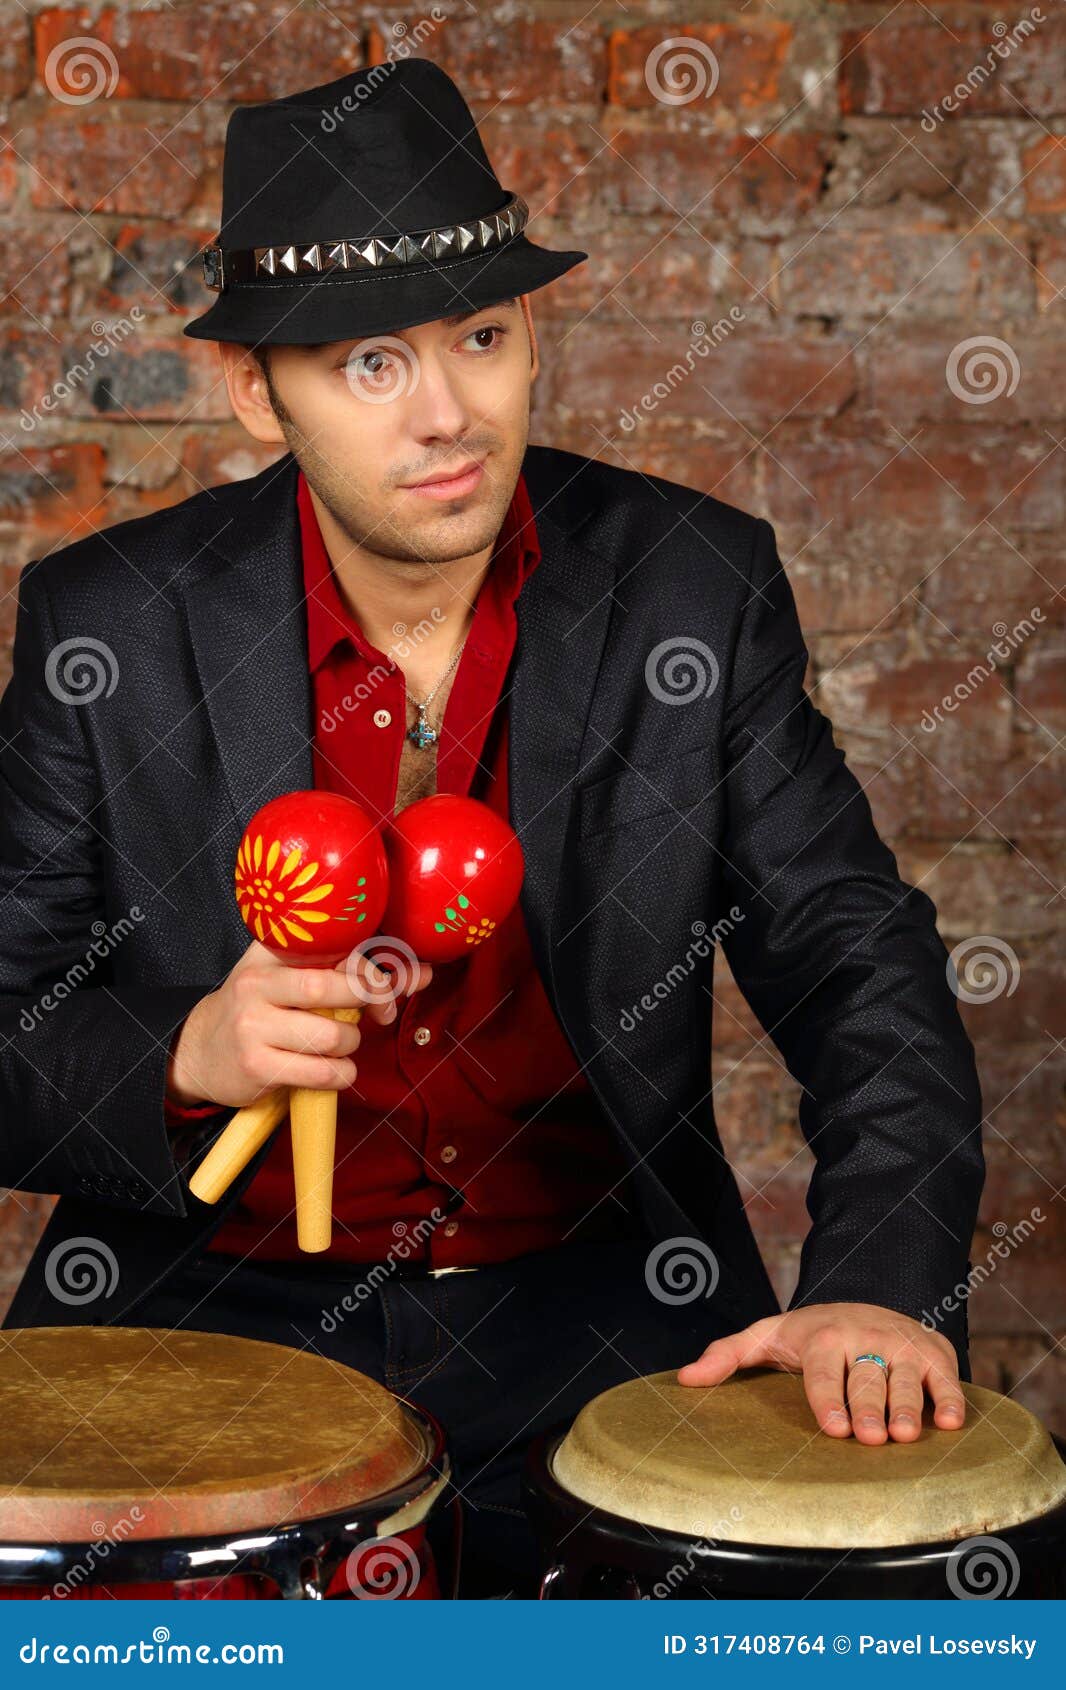 handsome man in suit and hat poses with maracas